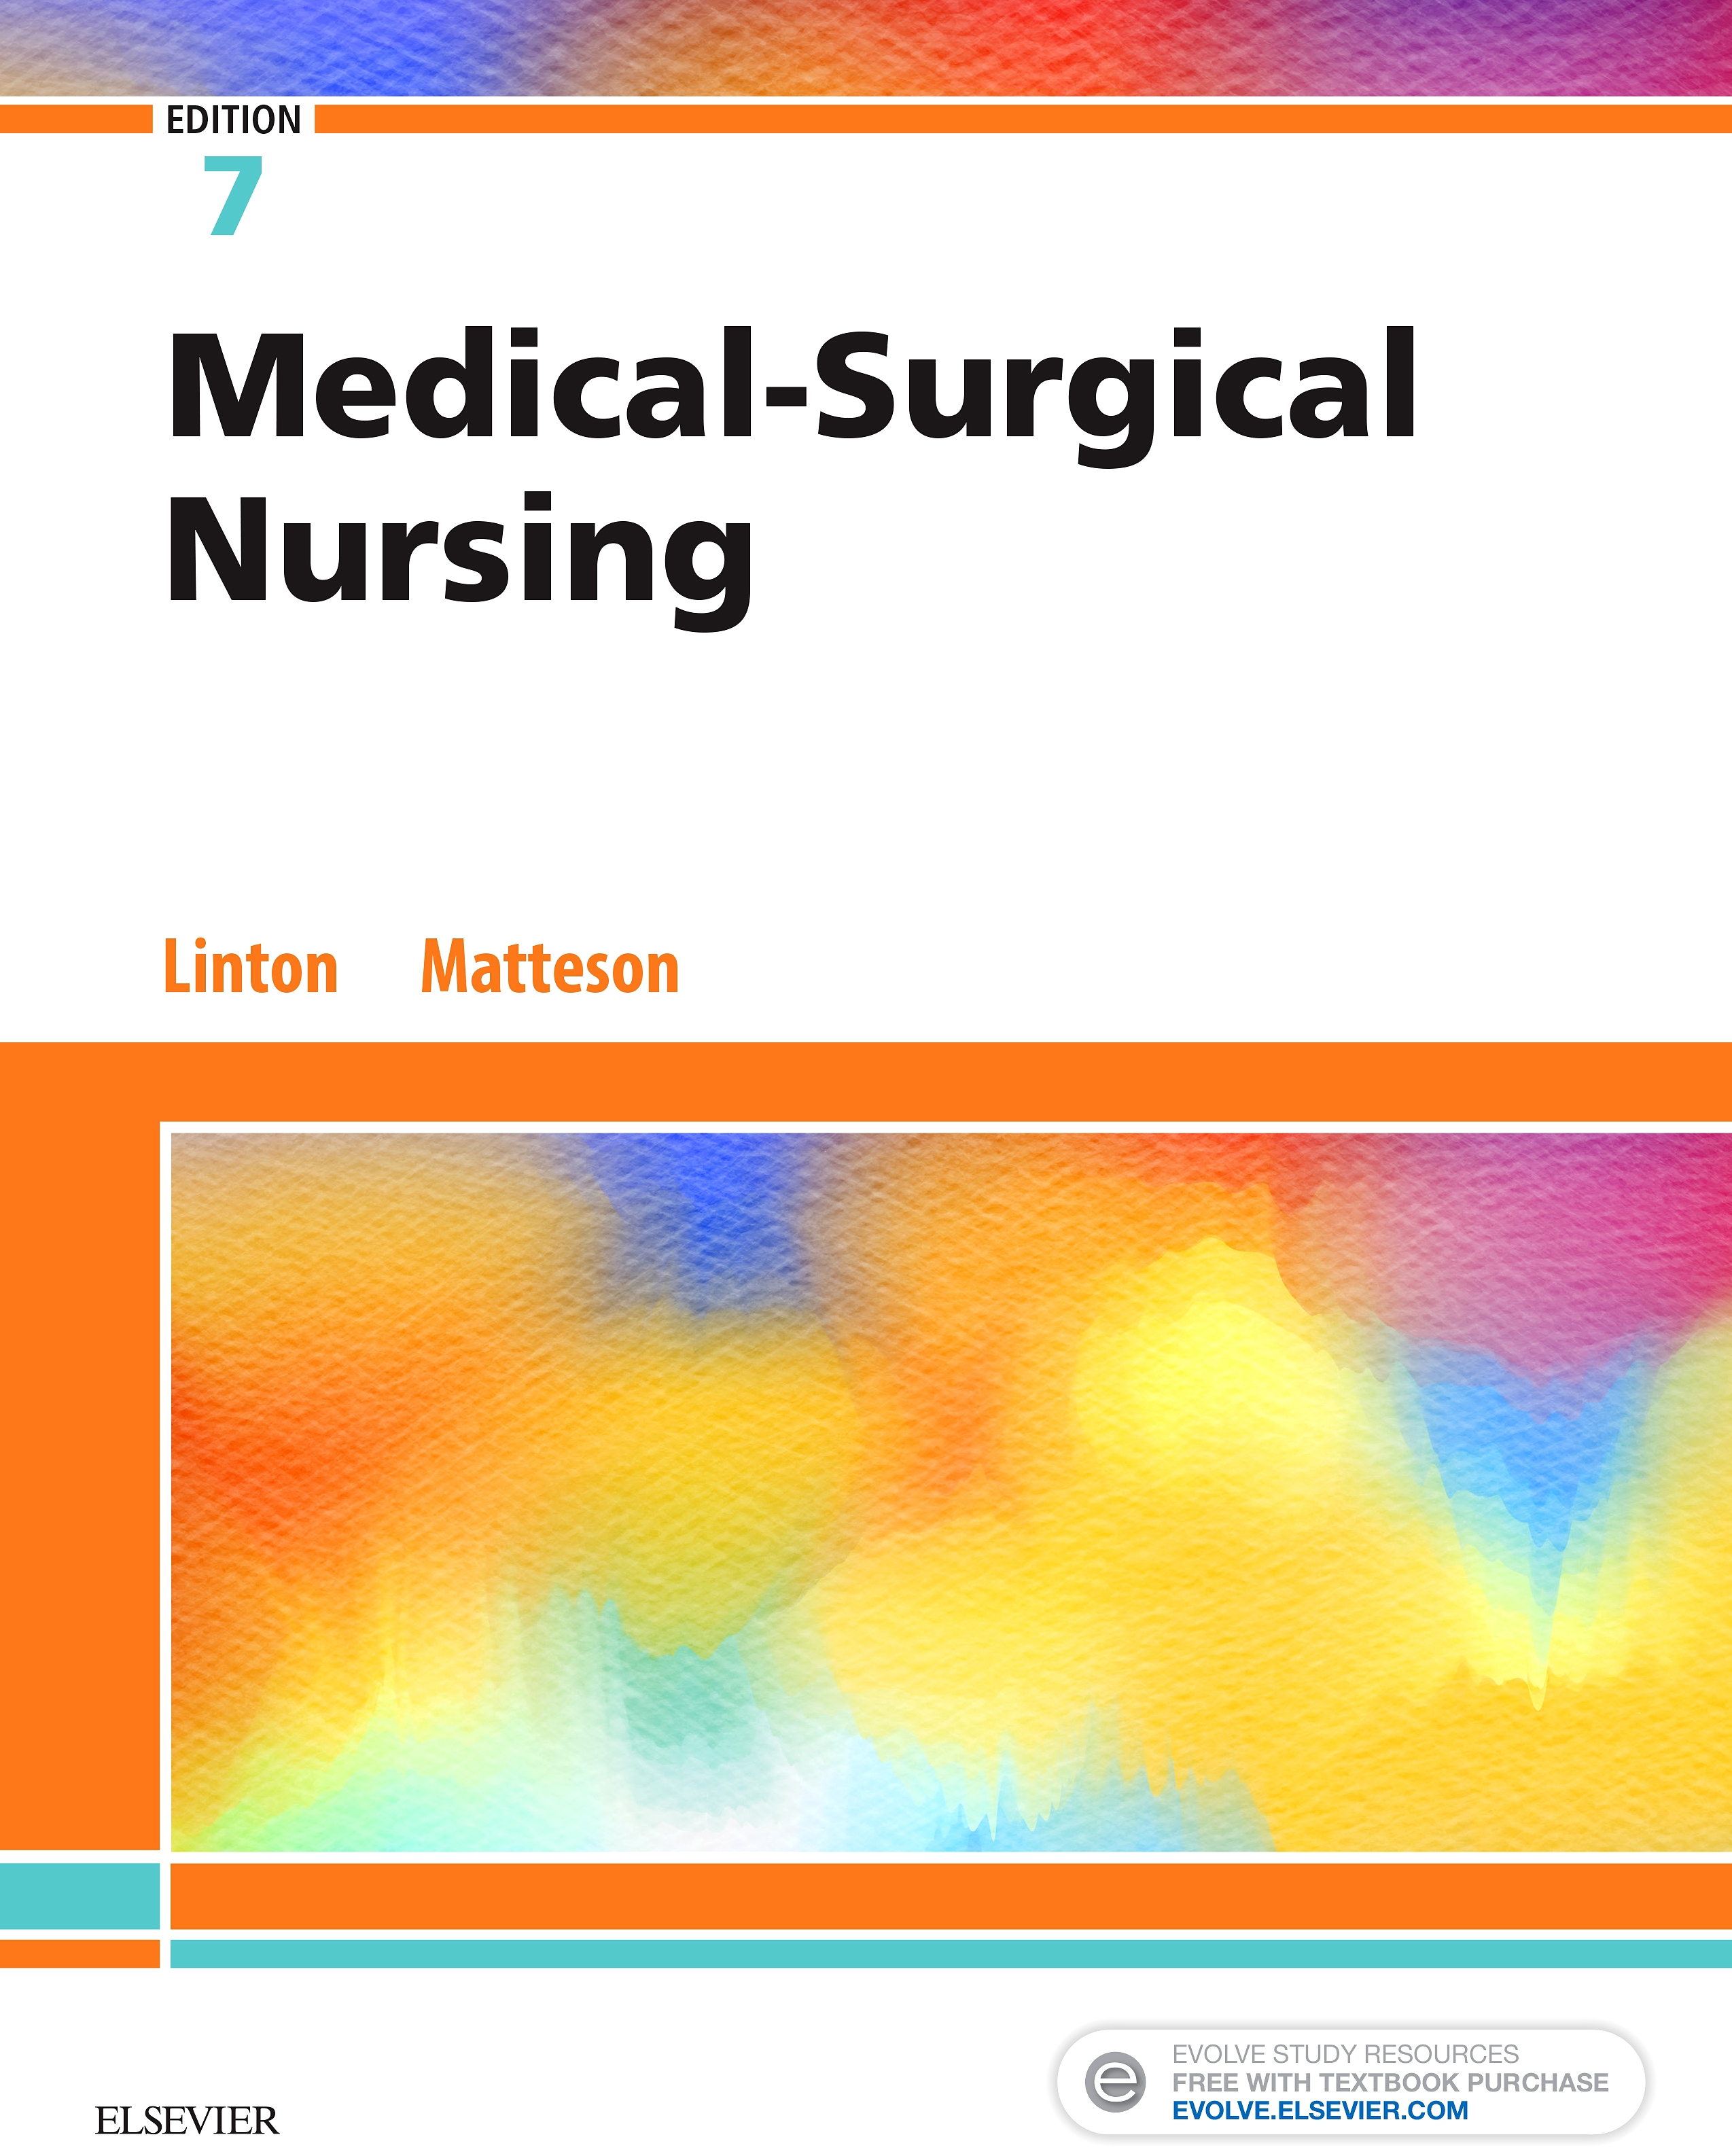 Evolve Resources for Medical-Surgical Nursing, 7th Edition